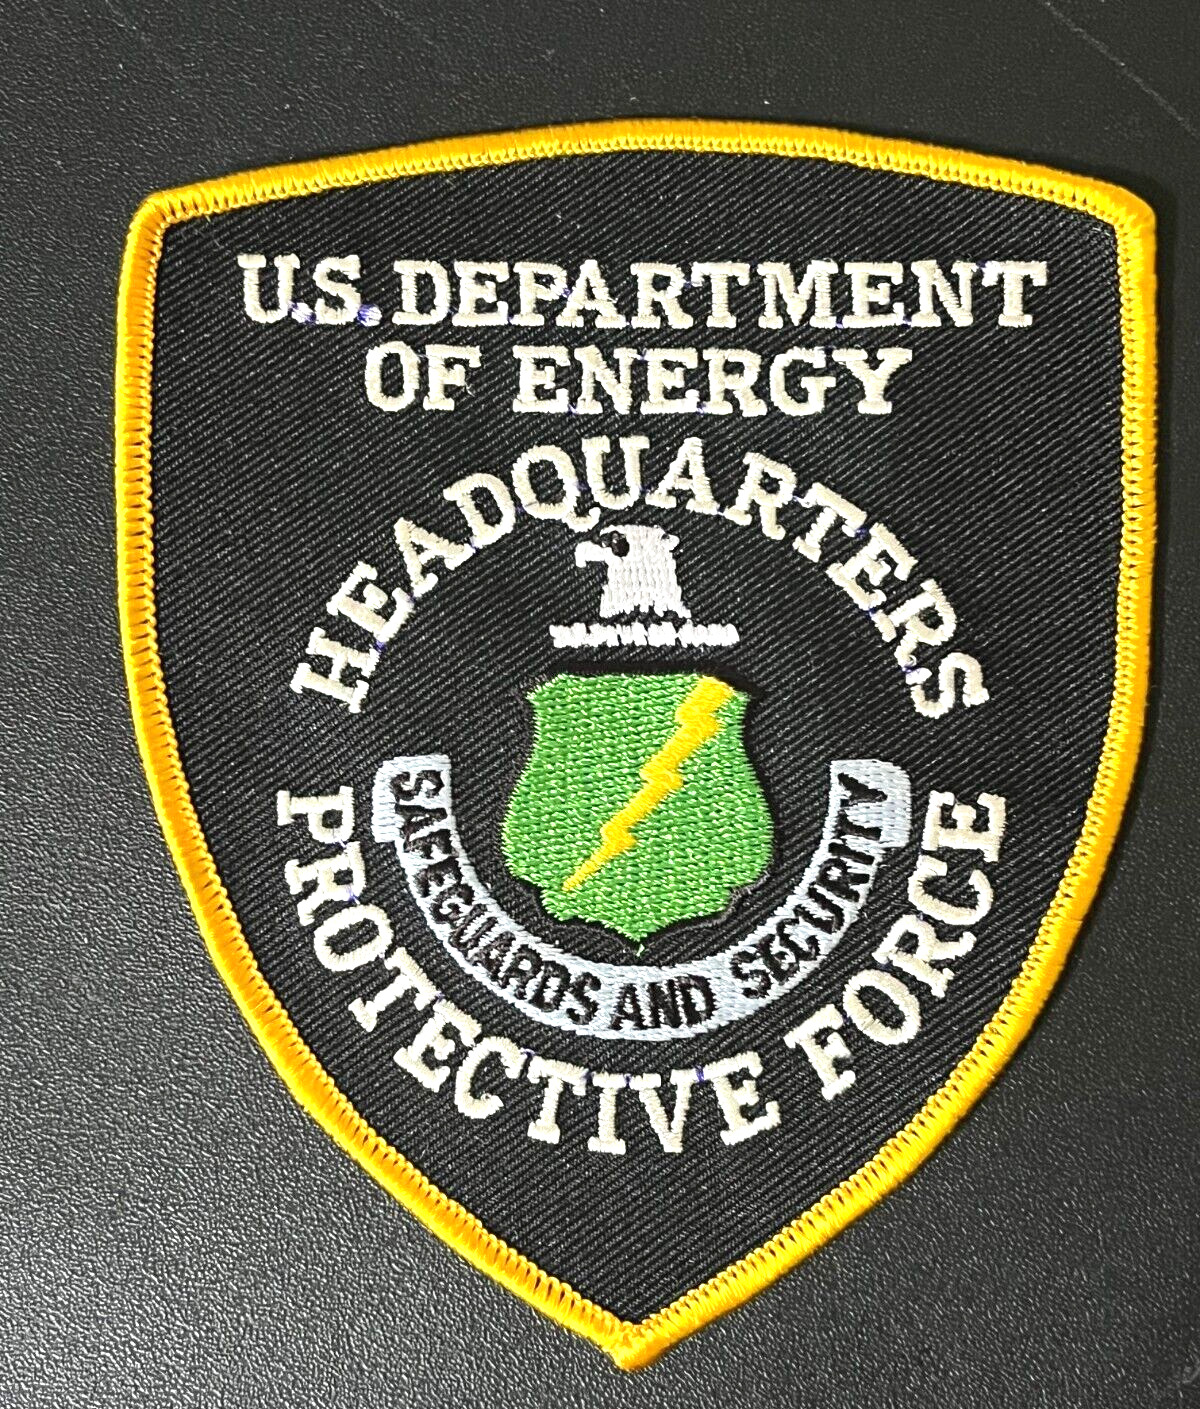 U.S. DEPARTMENT OF ENERGY HEADQUARTERS PROTECTIVE FORCE PATCH (SPC8)